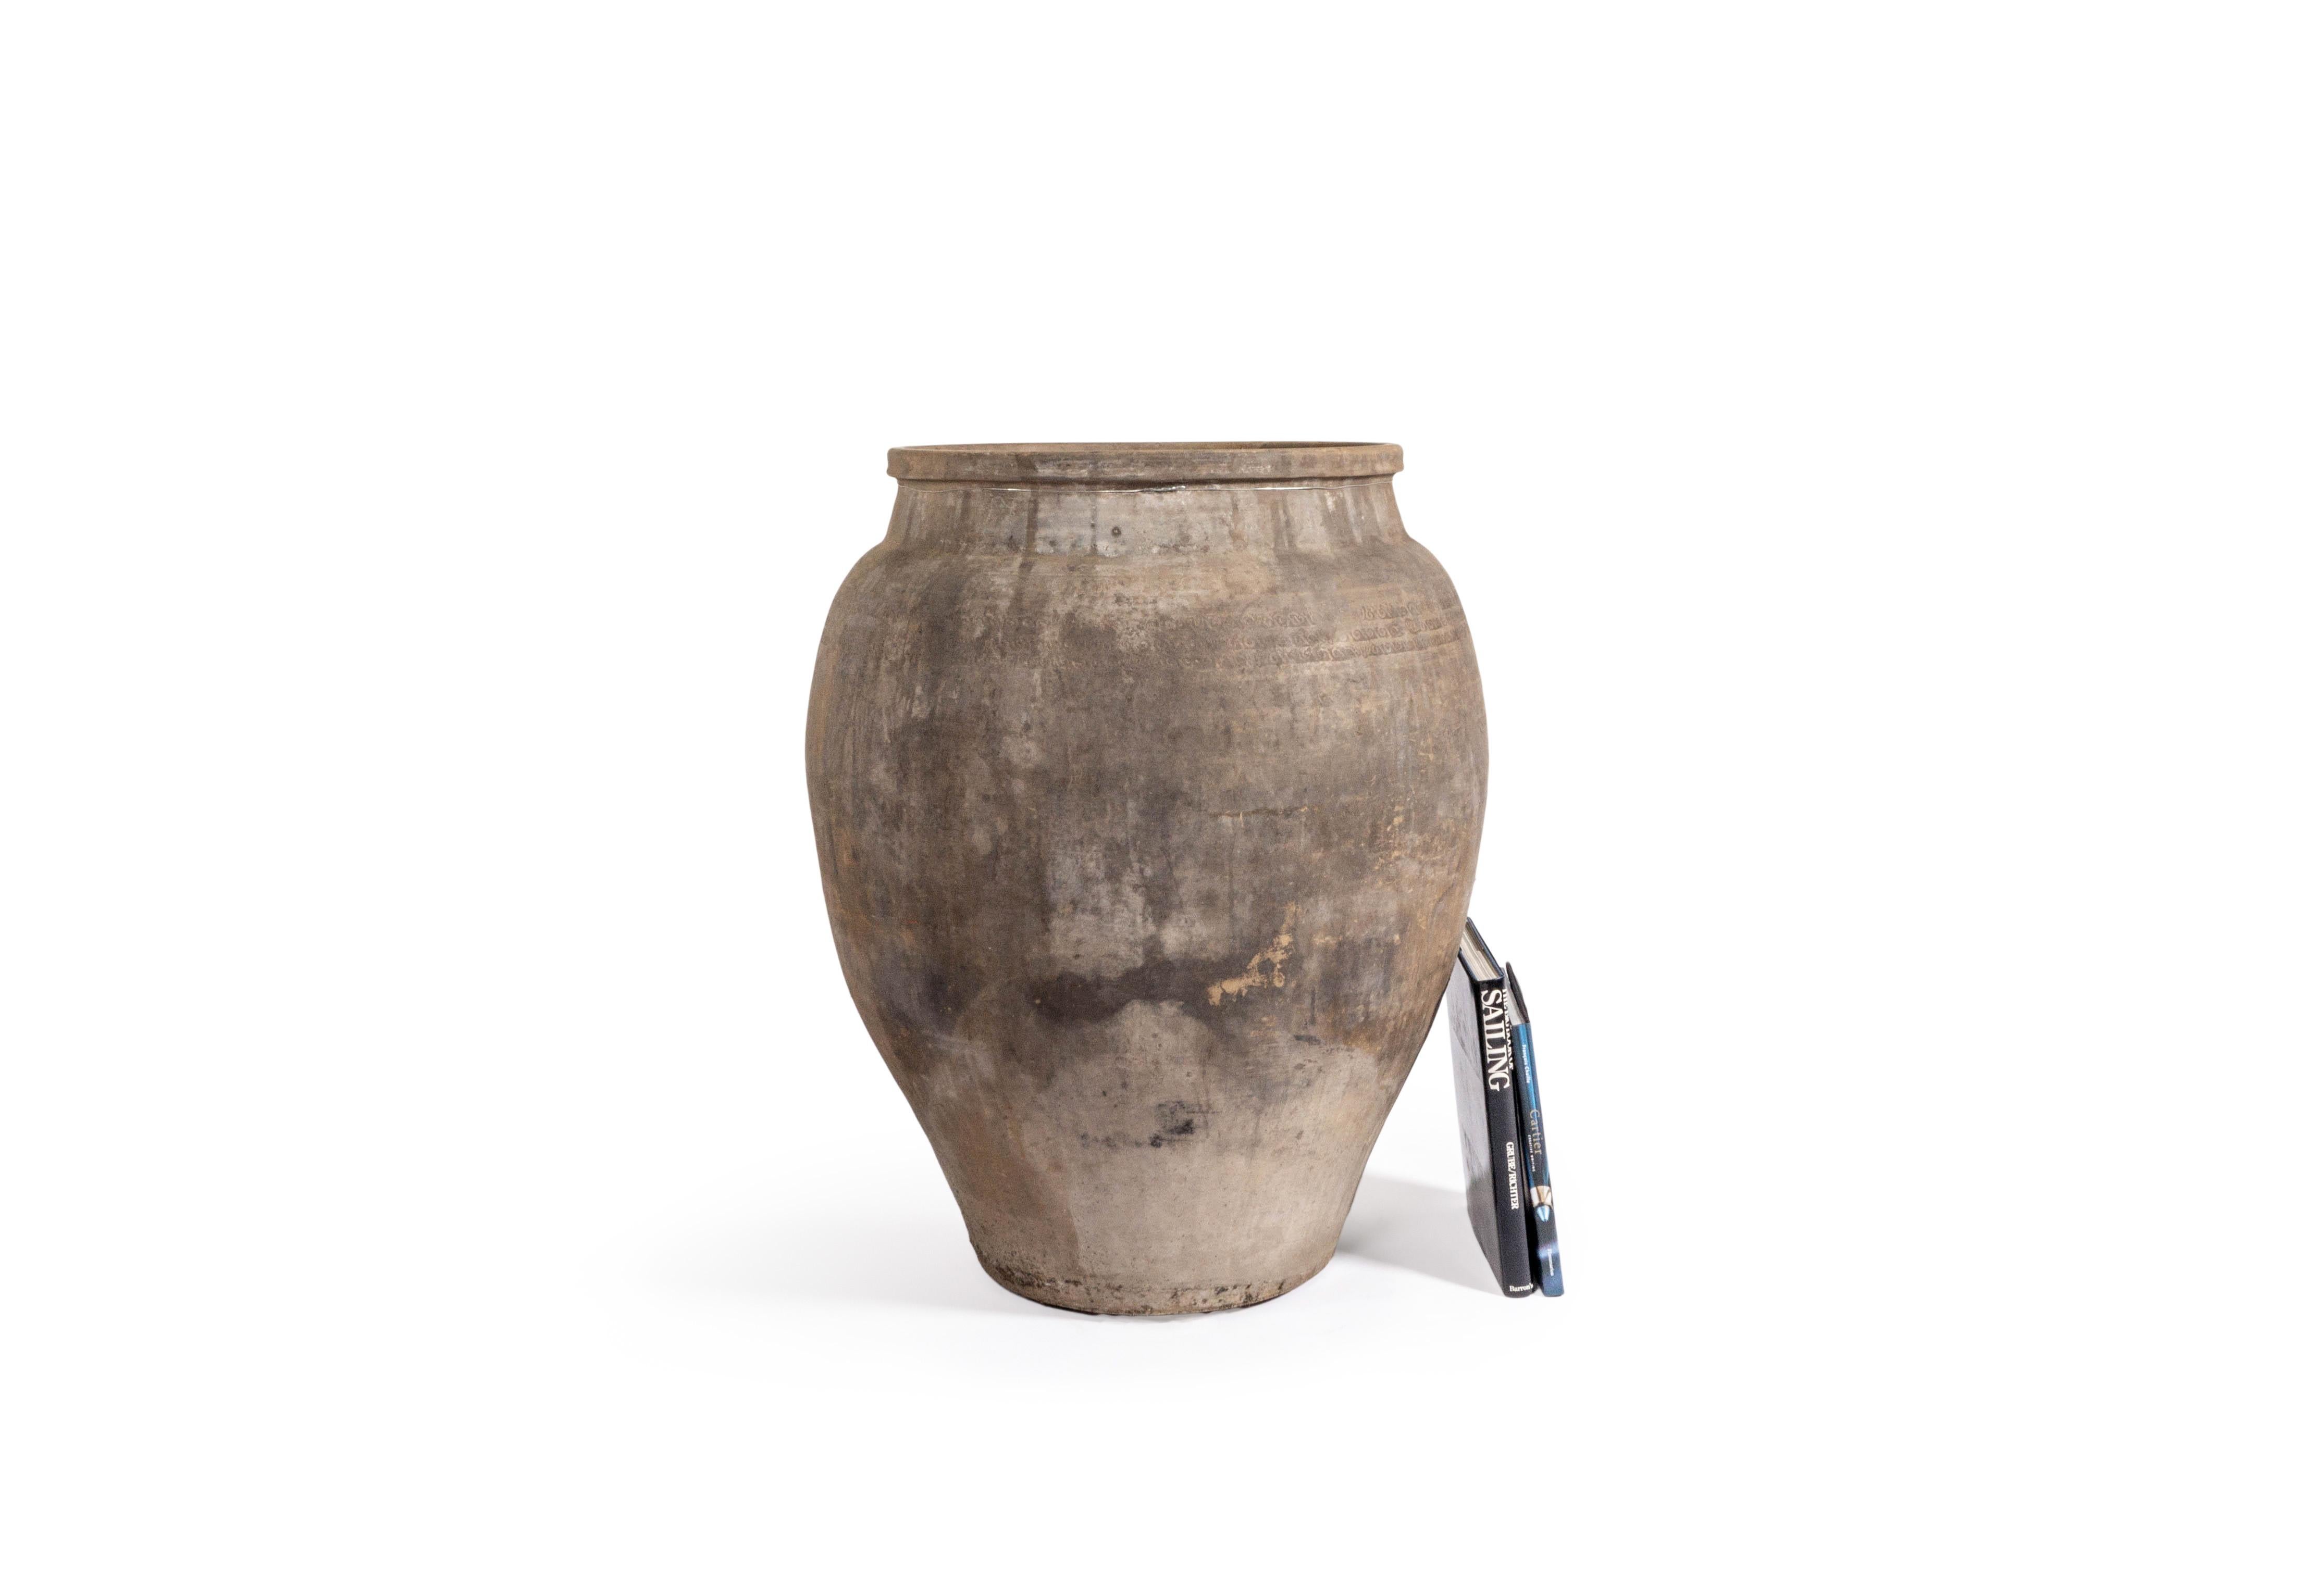 This monumental terra cotta storage jar features a beautiful charcoal color and one of a kind designed near the opening of the vessel. 

This piece is a part of Brendan Bass’s one-of-a-kind collection, Le Monde. French for “The World”, the Le